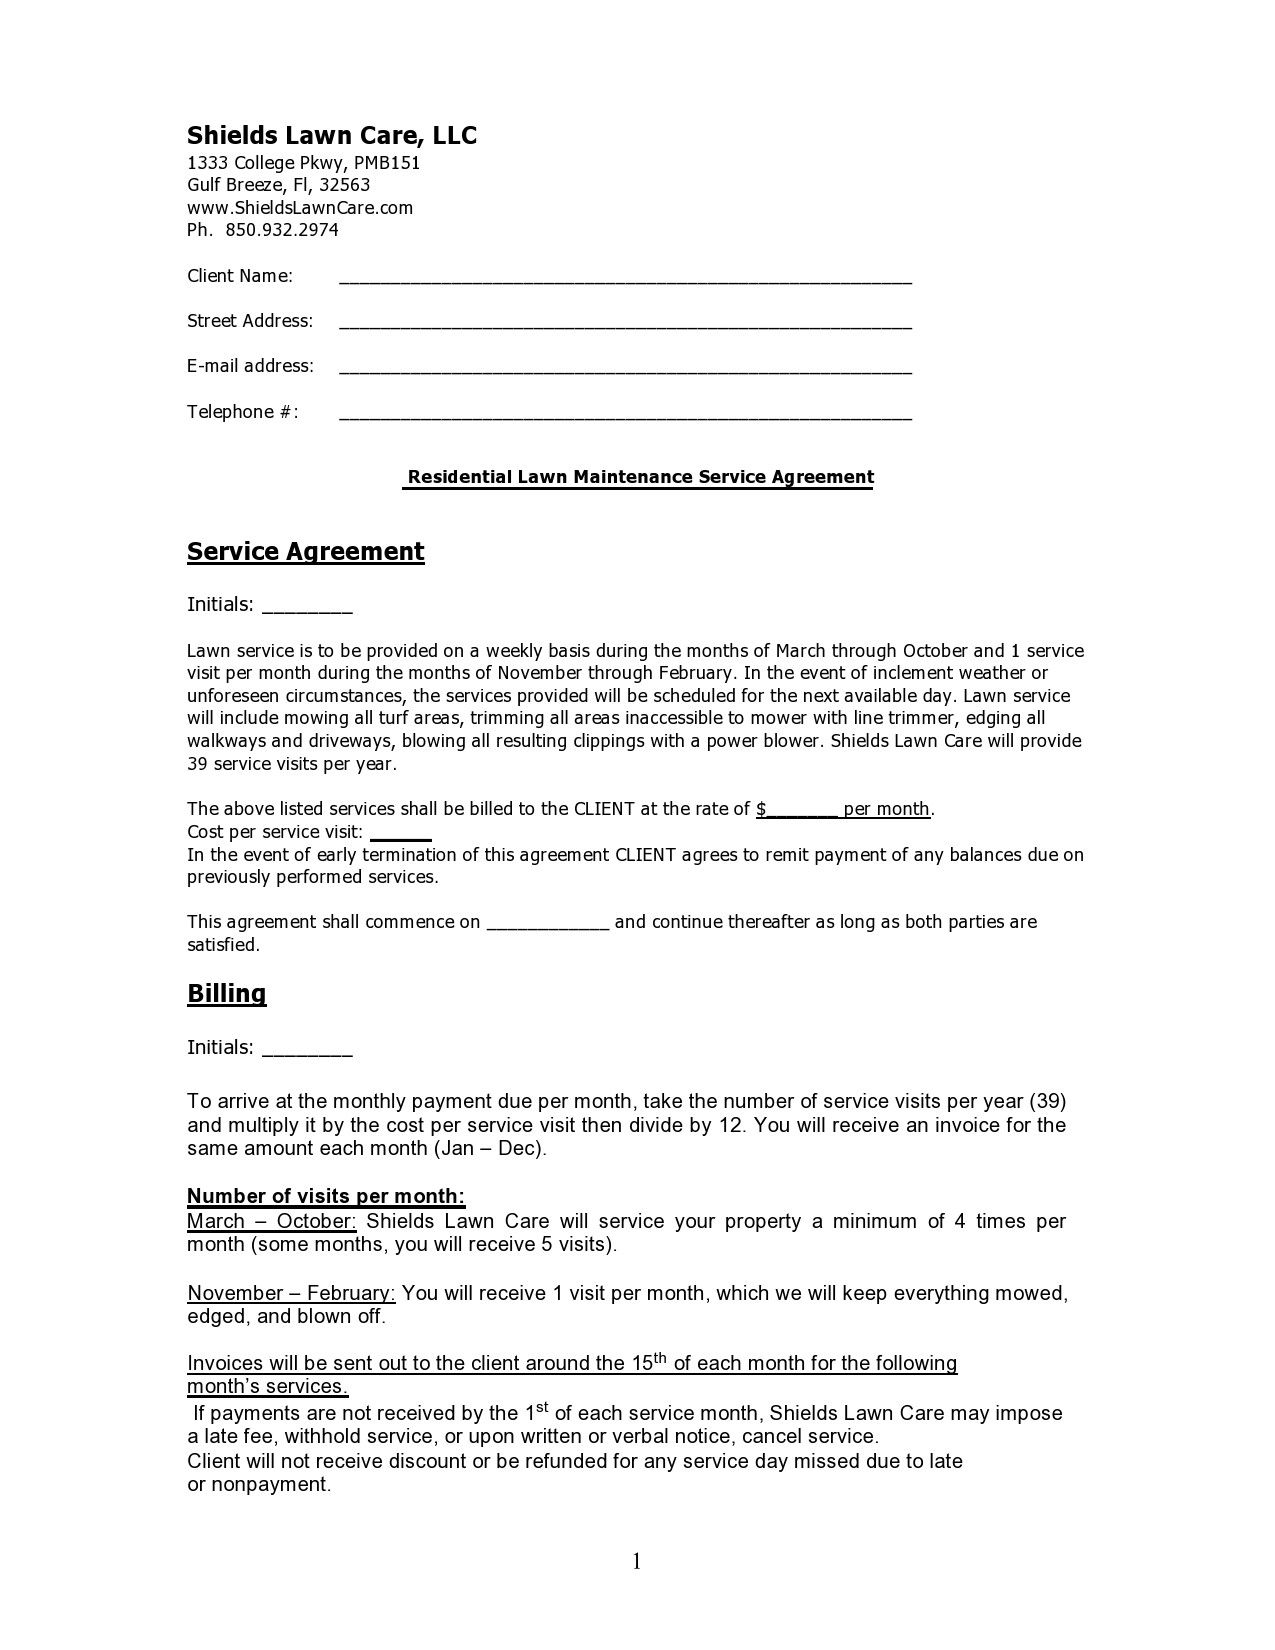 Free lawn care contract template 30